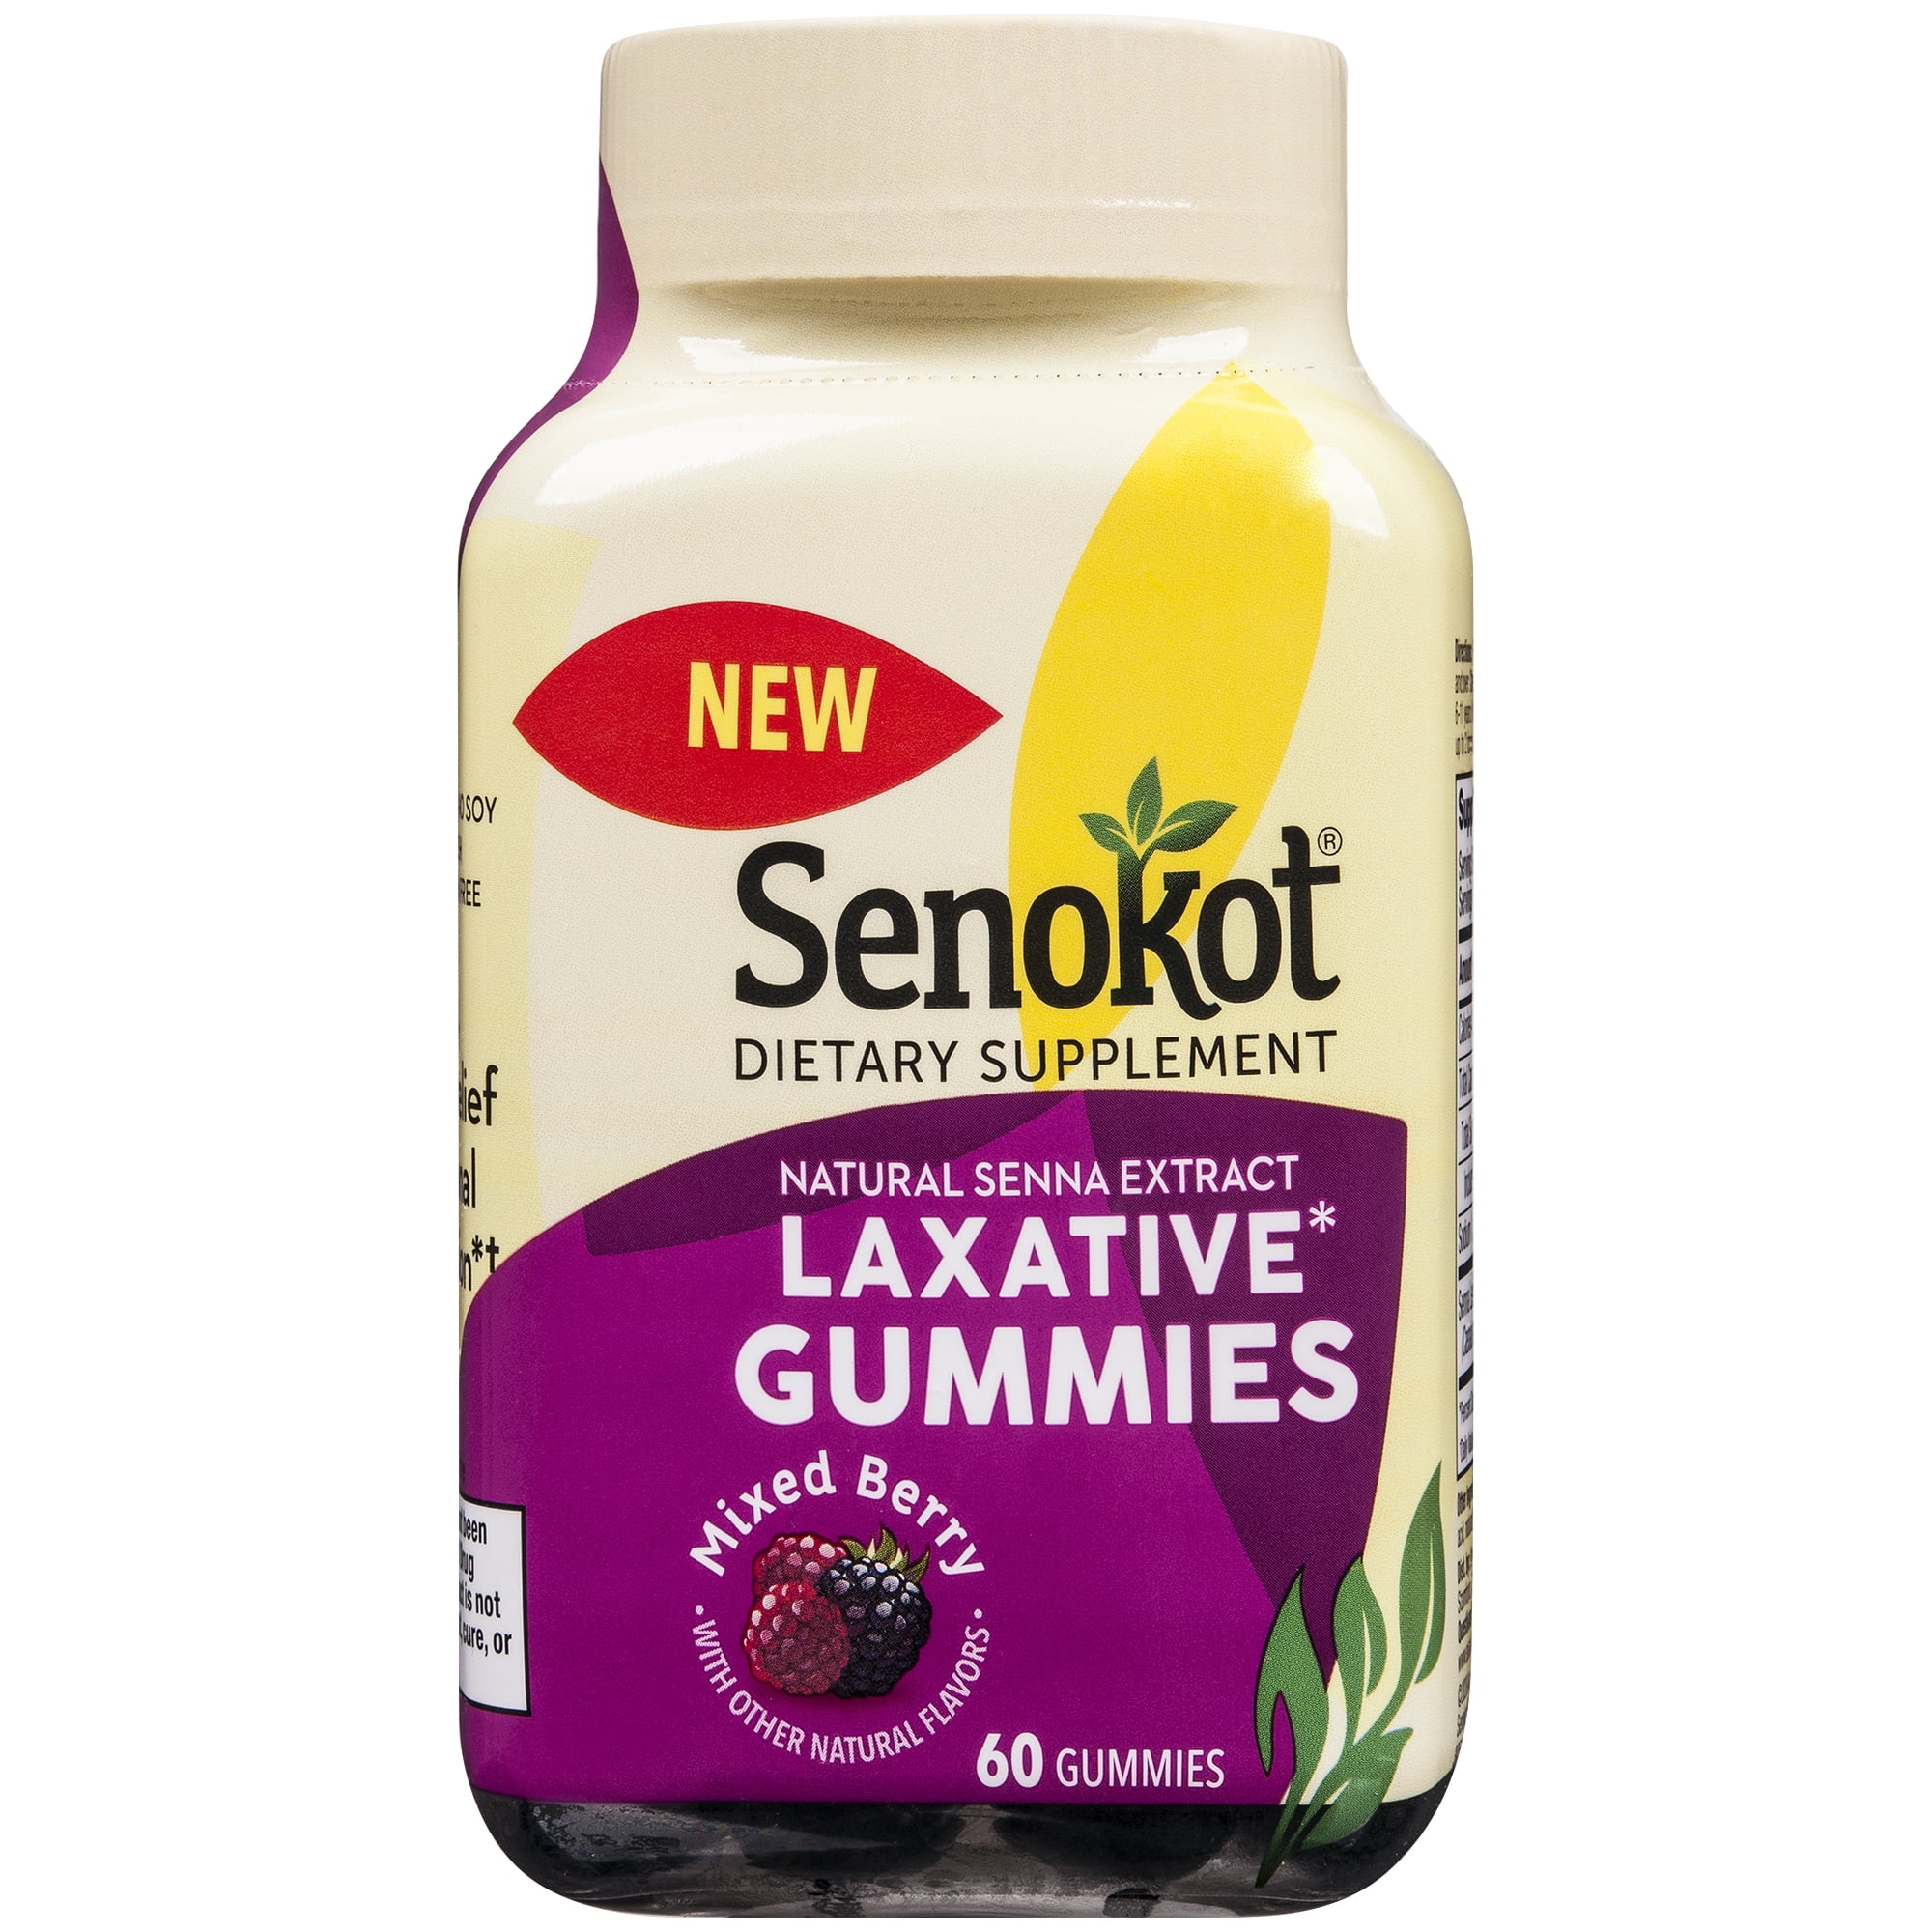 Looking to Buy Senokot: 10 Must-Know Facts About This Laxative